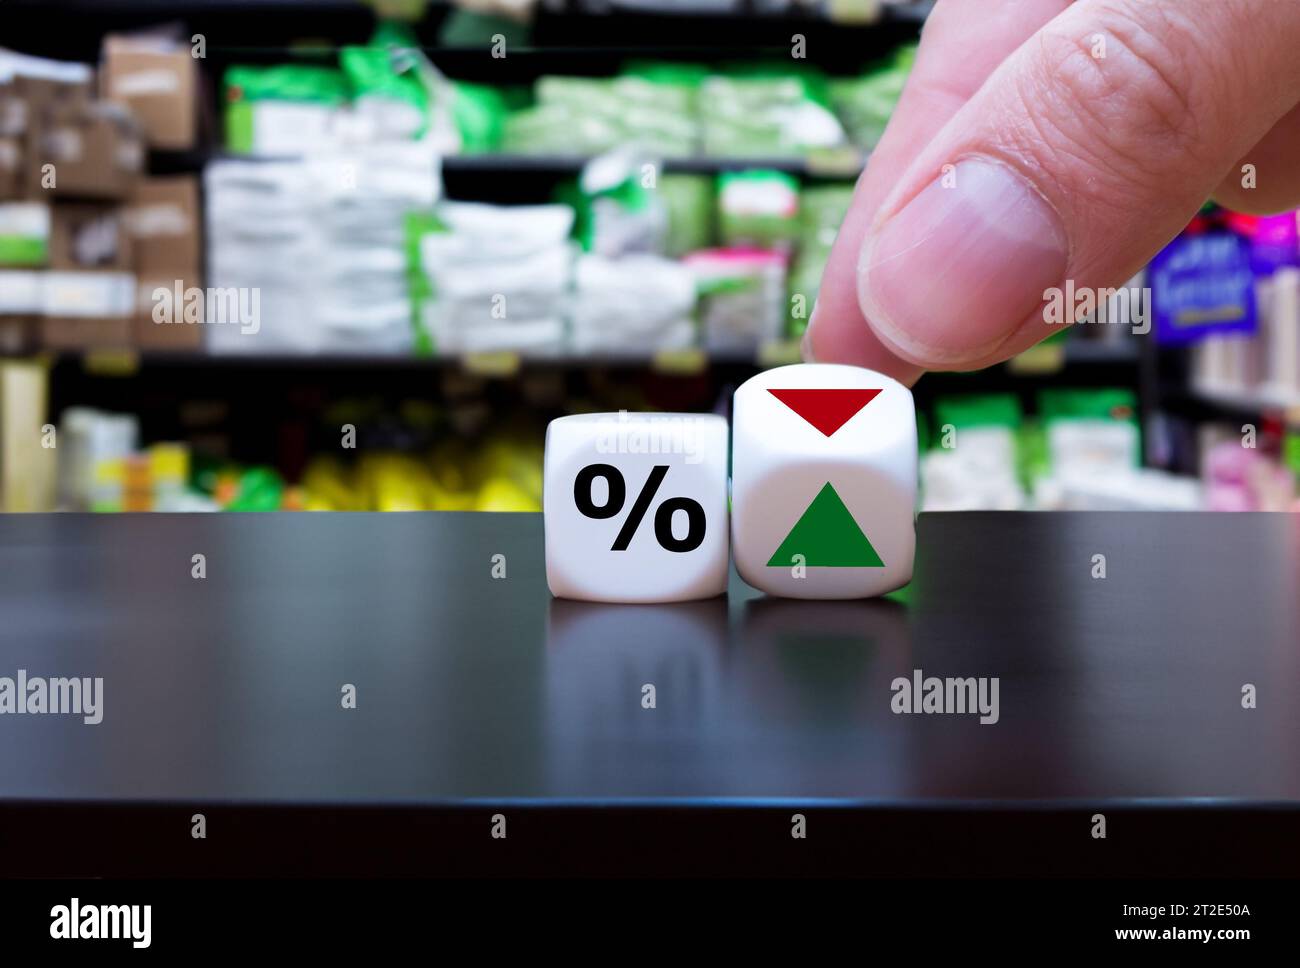 Hand turns dice and changes the orientation of an arrow next to a percentage symbol. Stock Photo